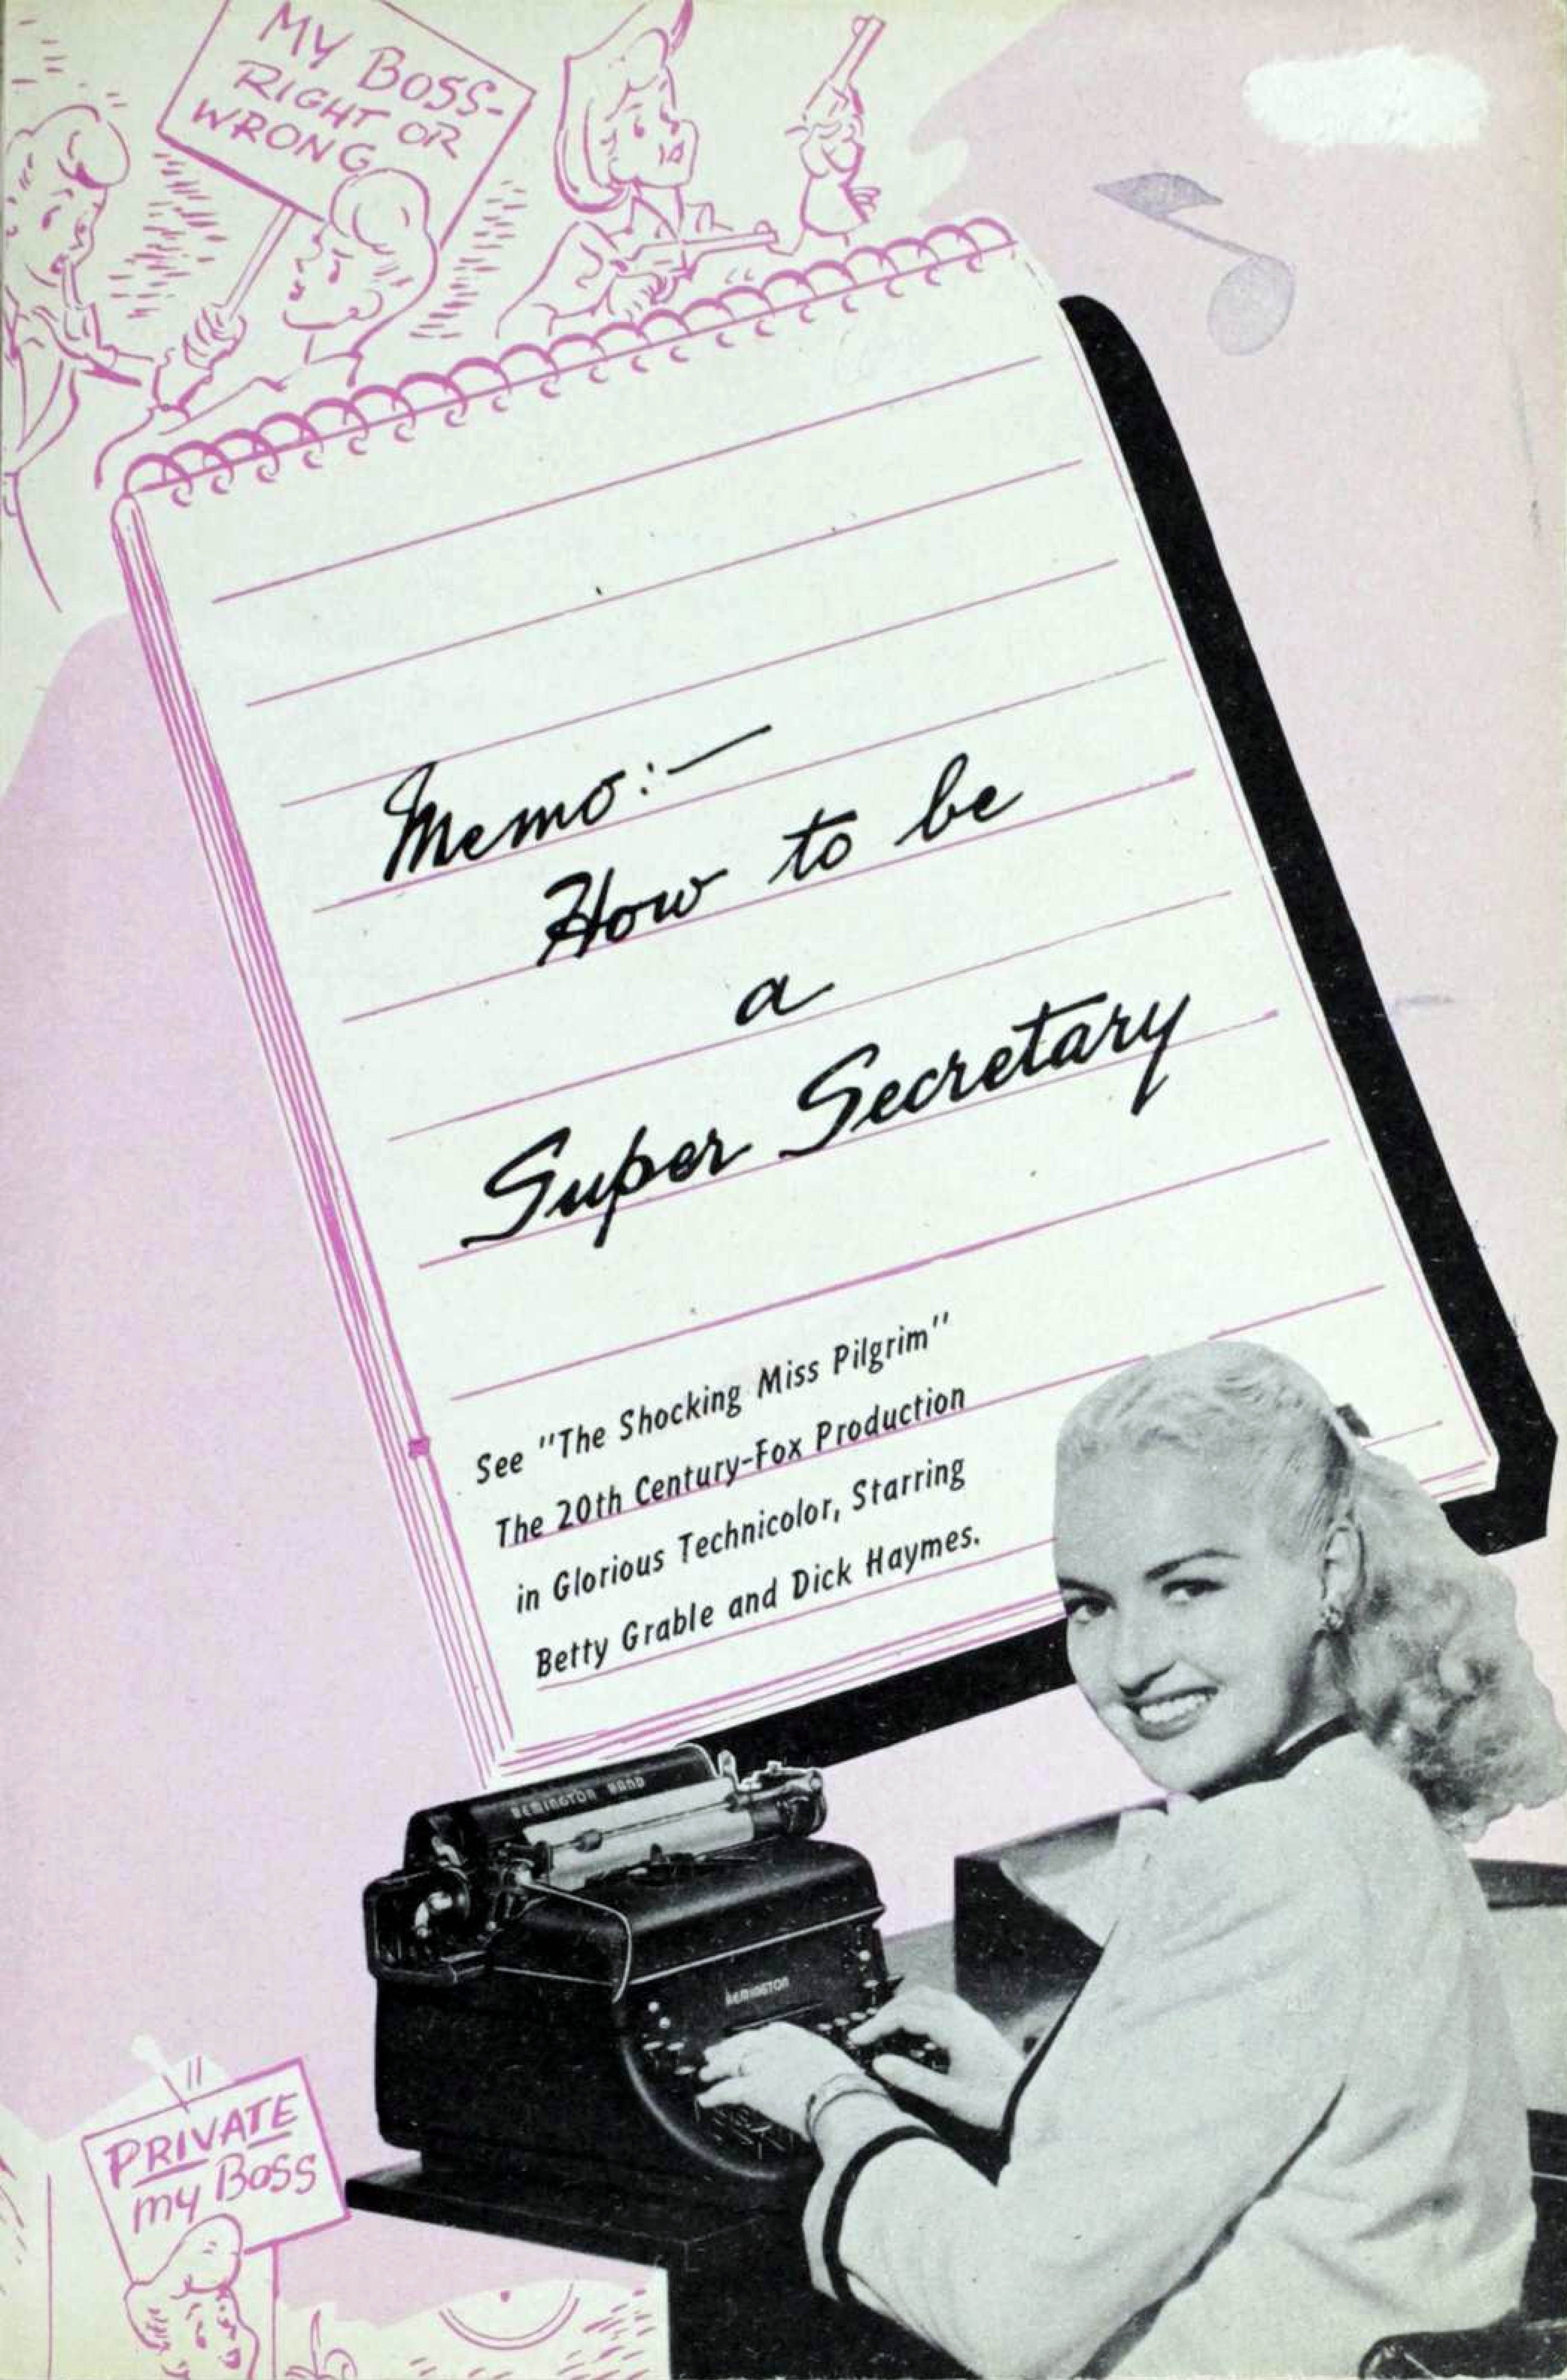 Cover for a pamphlet featuring a secretary at a desk, with title on an illustration of a memo pad.